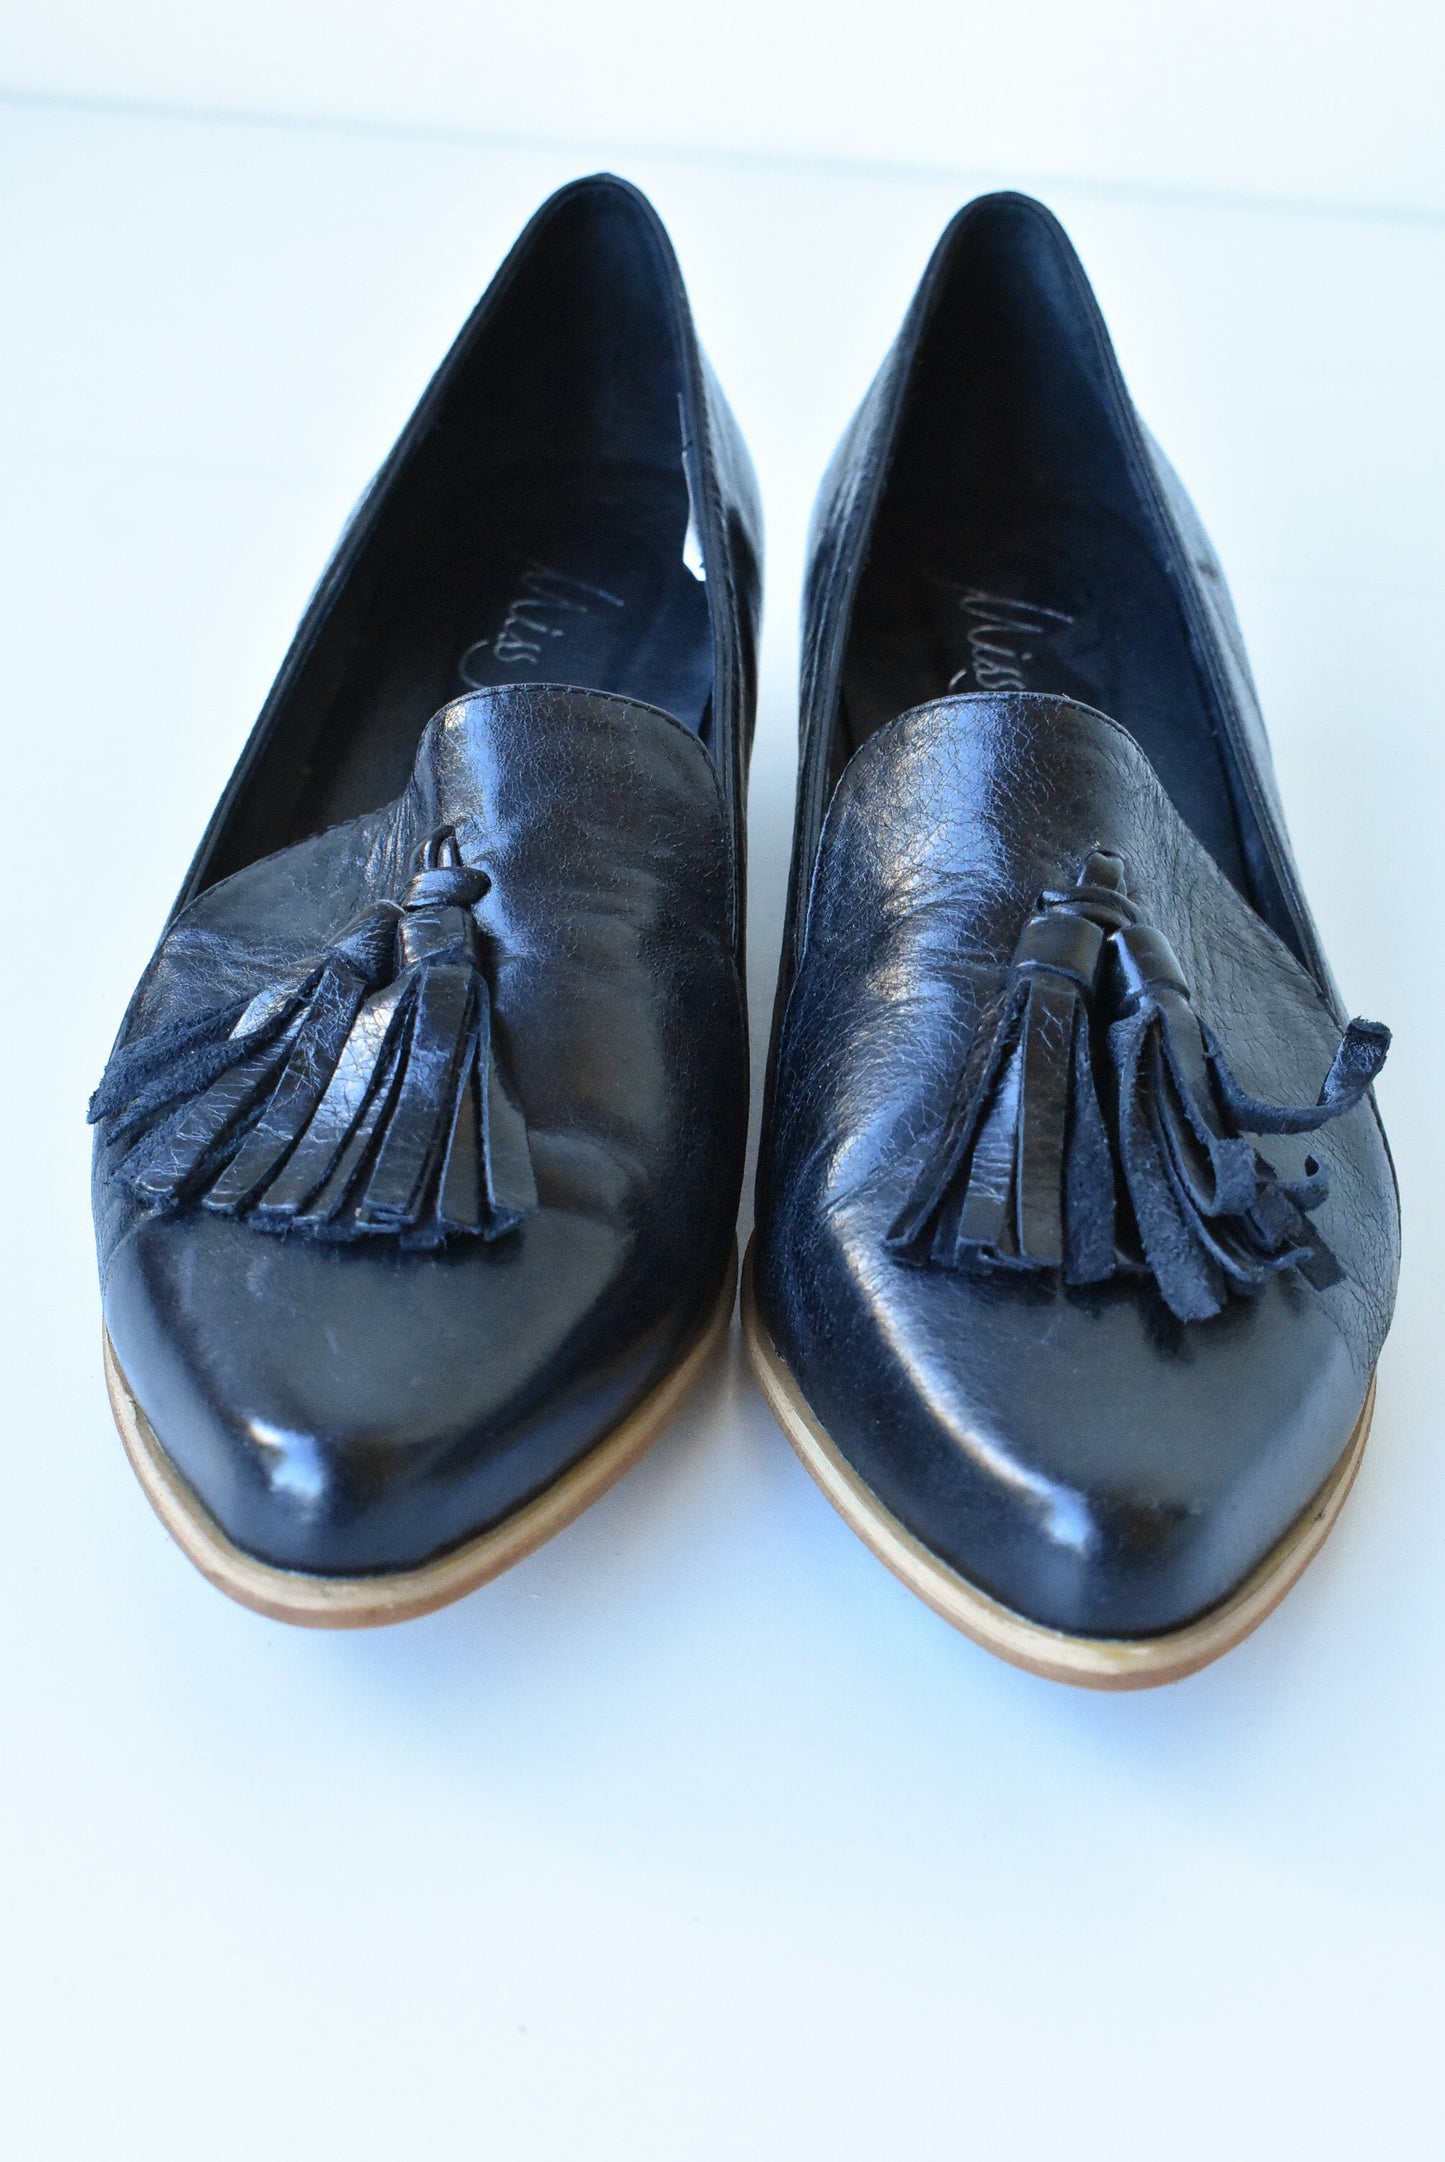 Miss Sofie black patent leather loafers, size 40